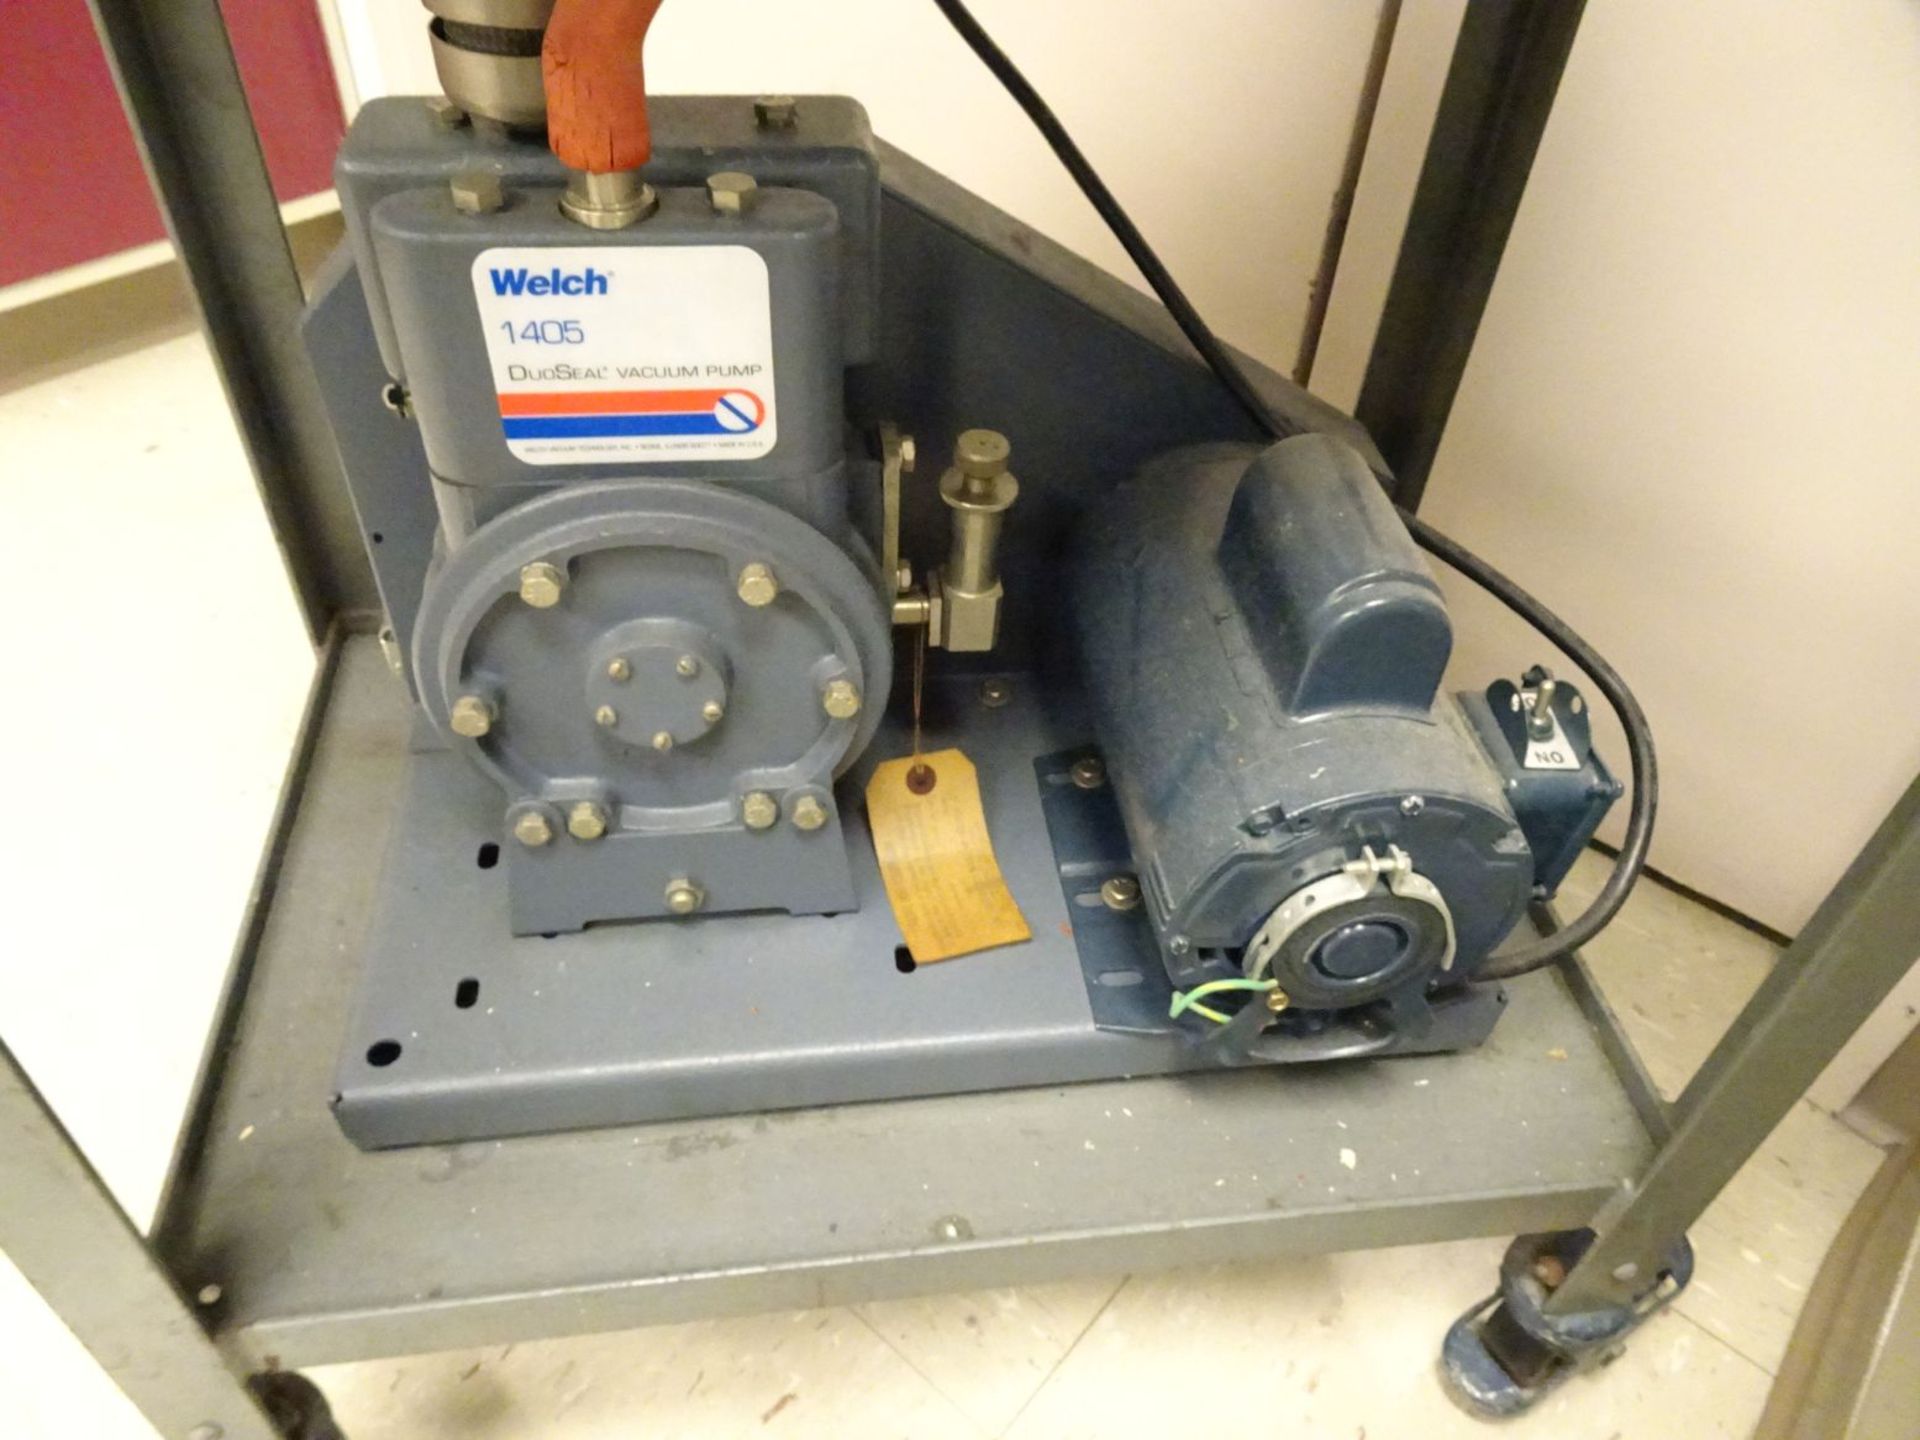 Welch 1405 DuoSeal Vacuum Pump with Glass Apparatus. - Image 4 of 8